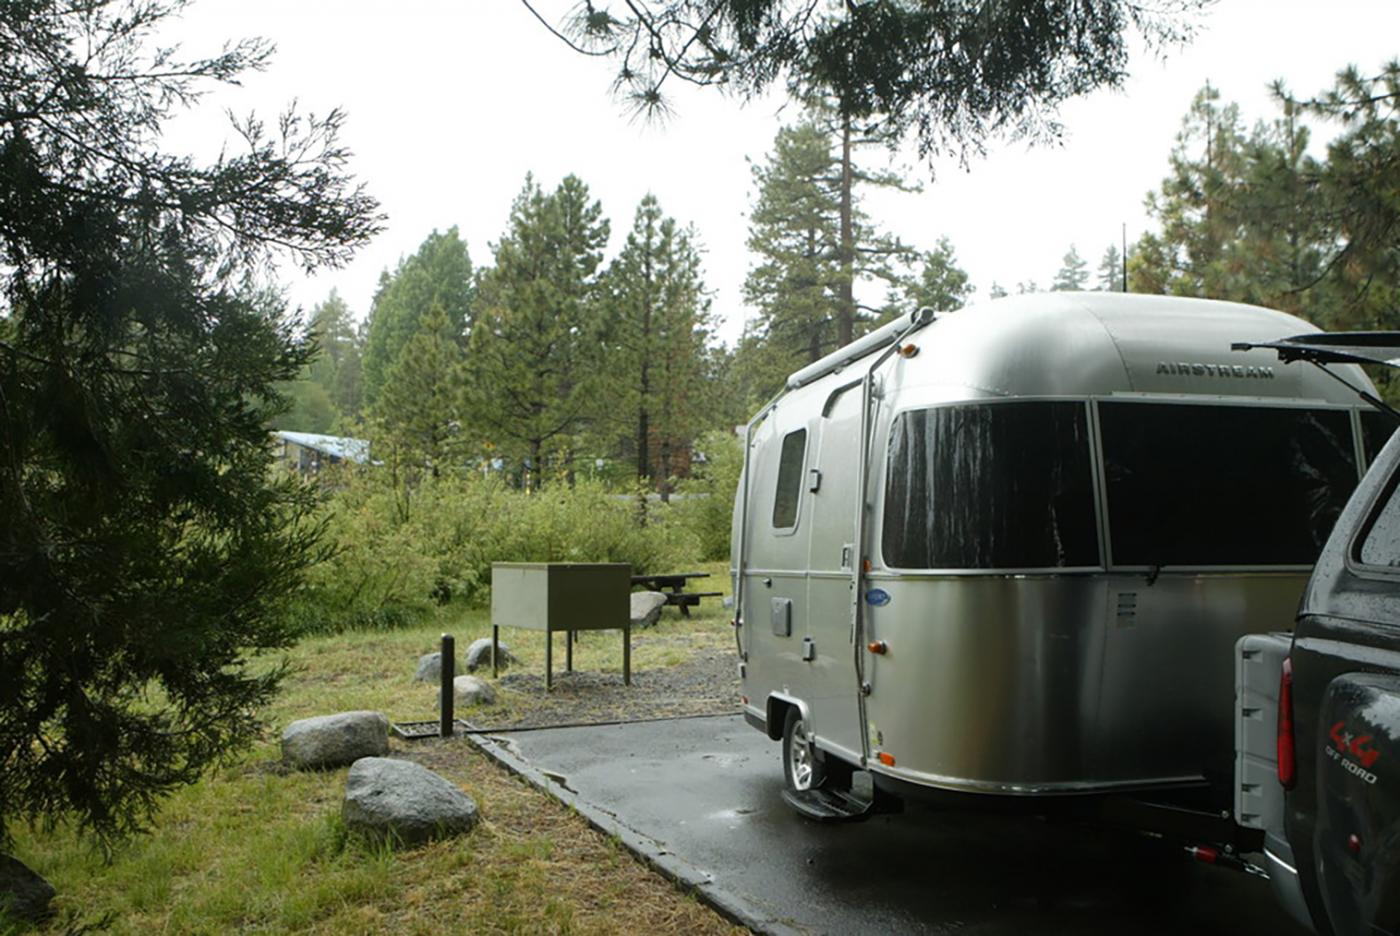 Who wouldn't want to go camping in an Airstream?